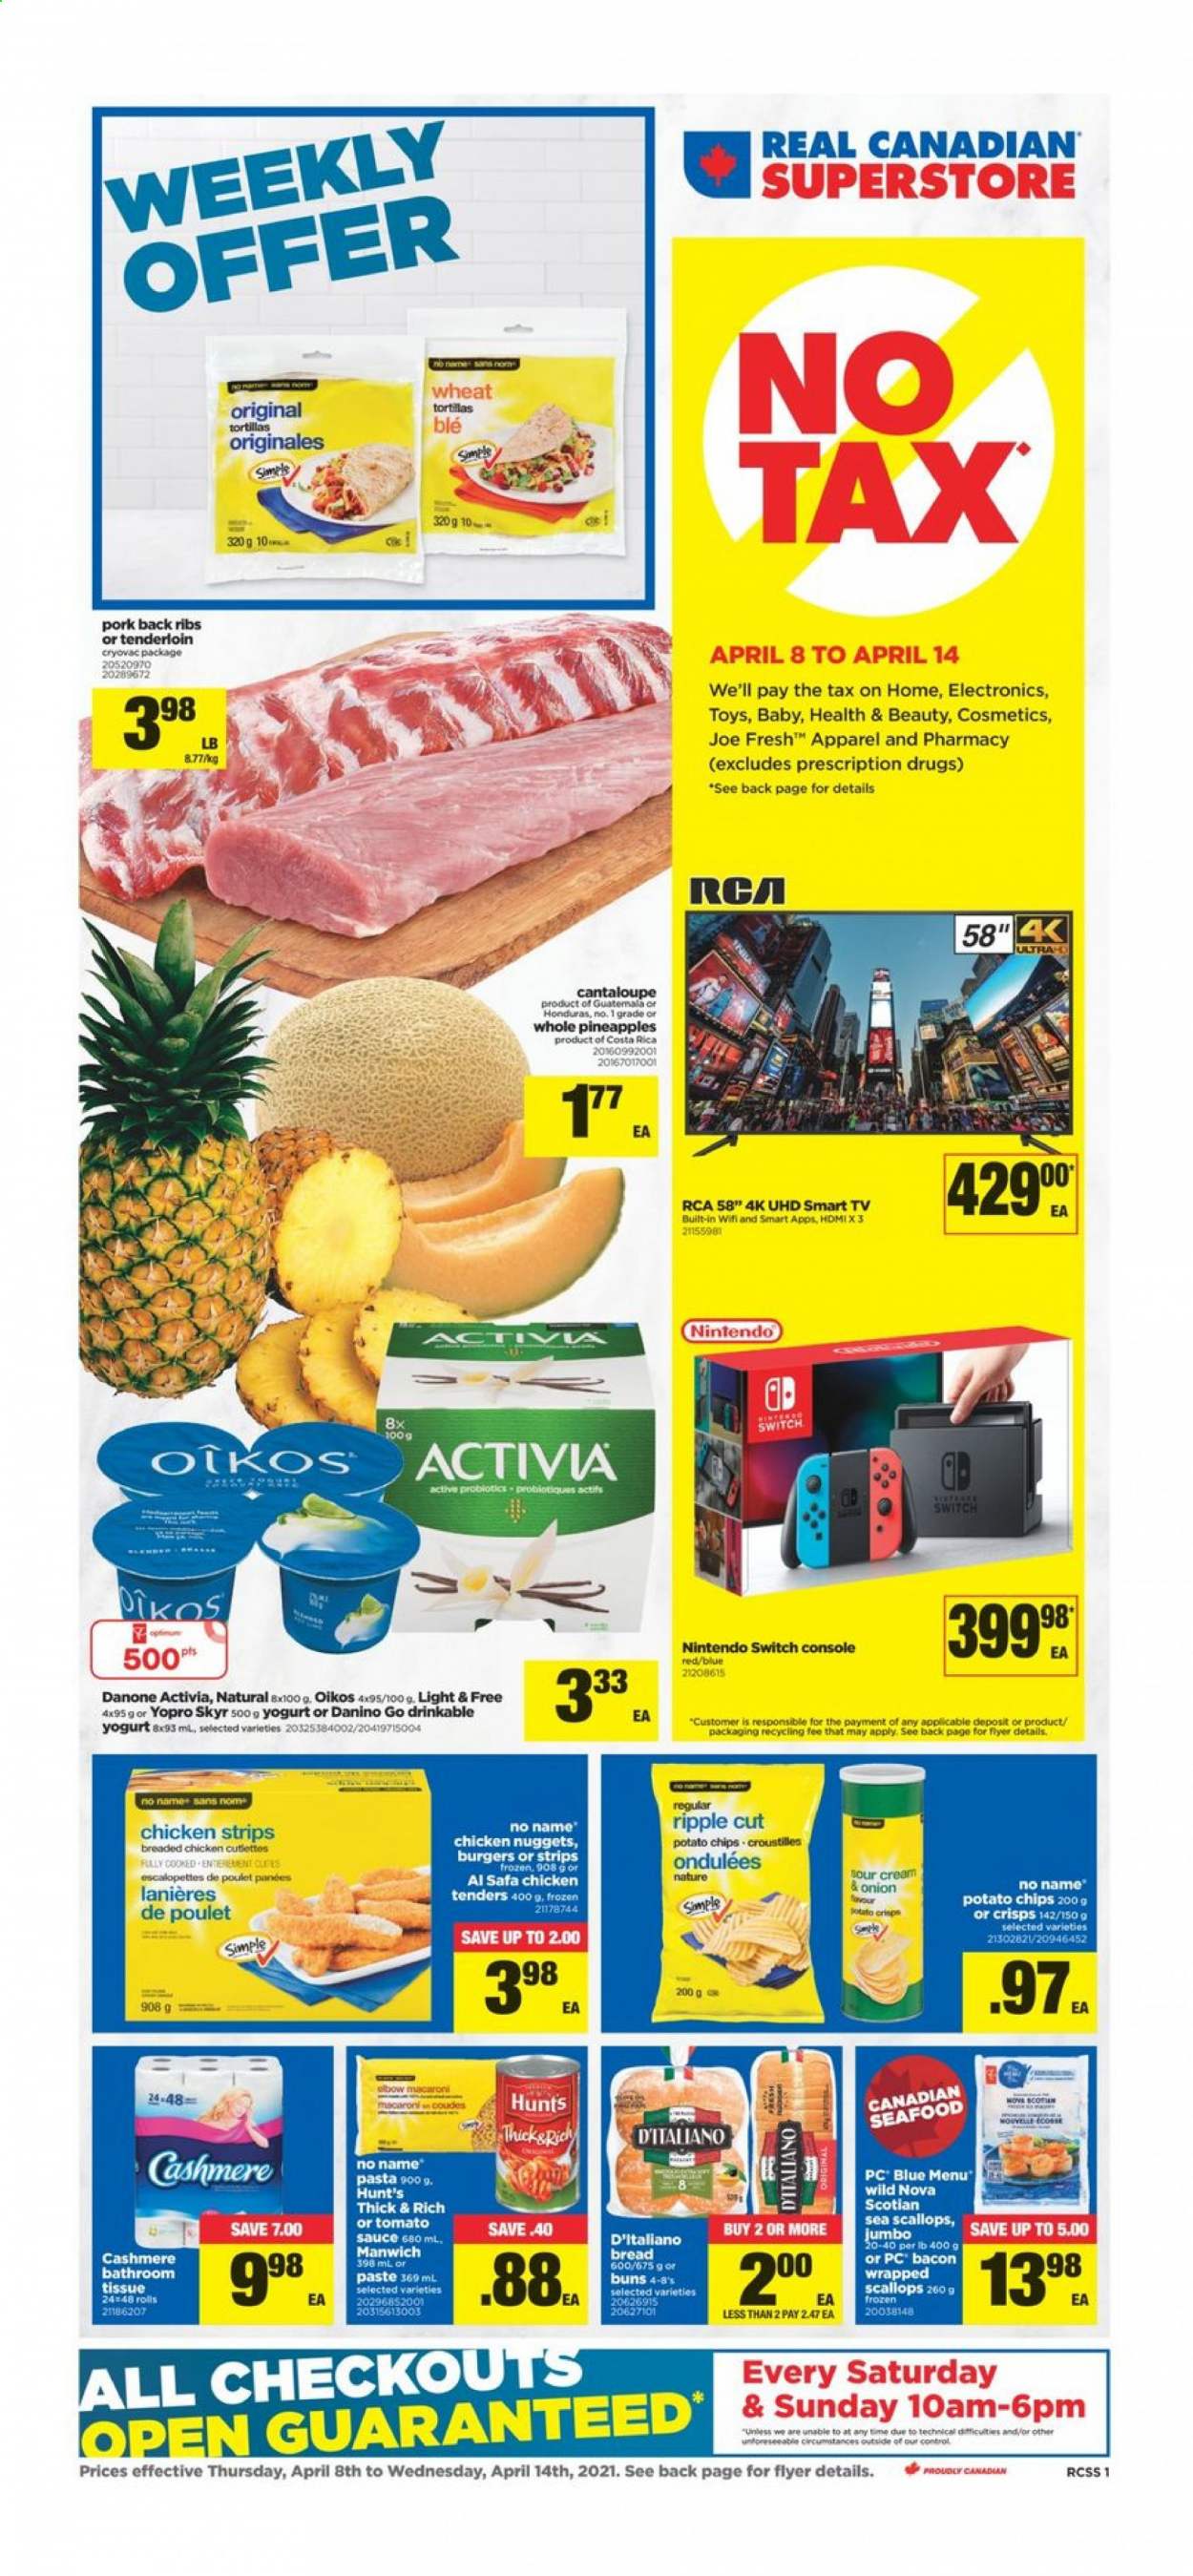 thumbnail - Real Canadian Superstore Flyer - April 08, 2021 - April 14, 2021 - Sales products - Nintendo Switch, bread, tortillas, buns, cantaloupe, pineapple, scallops, seafood, No Name, chicken tenders, macaroni, nuggets, hamburger, pasta, sauce, fried chicken, chicken nuggets, bacon, yoghurt, Activia, Oikos, strips, chicken strips, potato chips, tomato sauce, Manwich, pork meat, pork ribs, pork back ribs, tissues, RCA, UHD TV, TV, toys, probiotics, Danone, smart tv. Page 1.